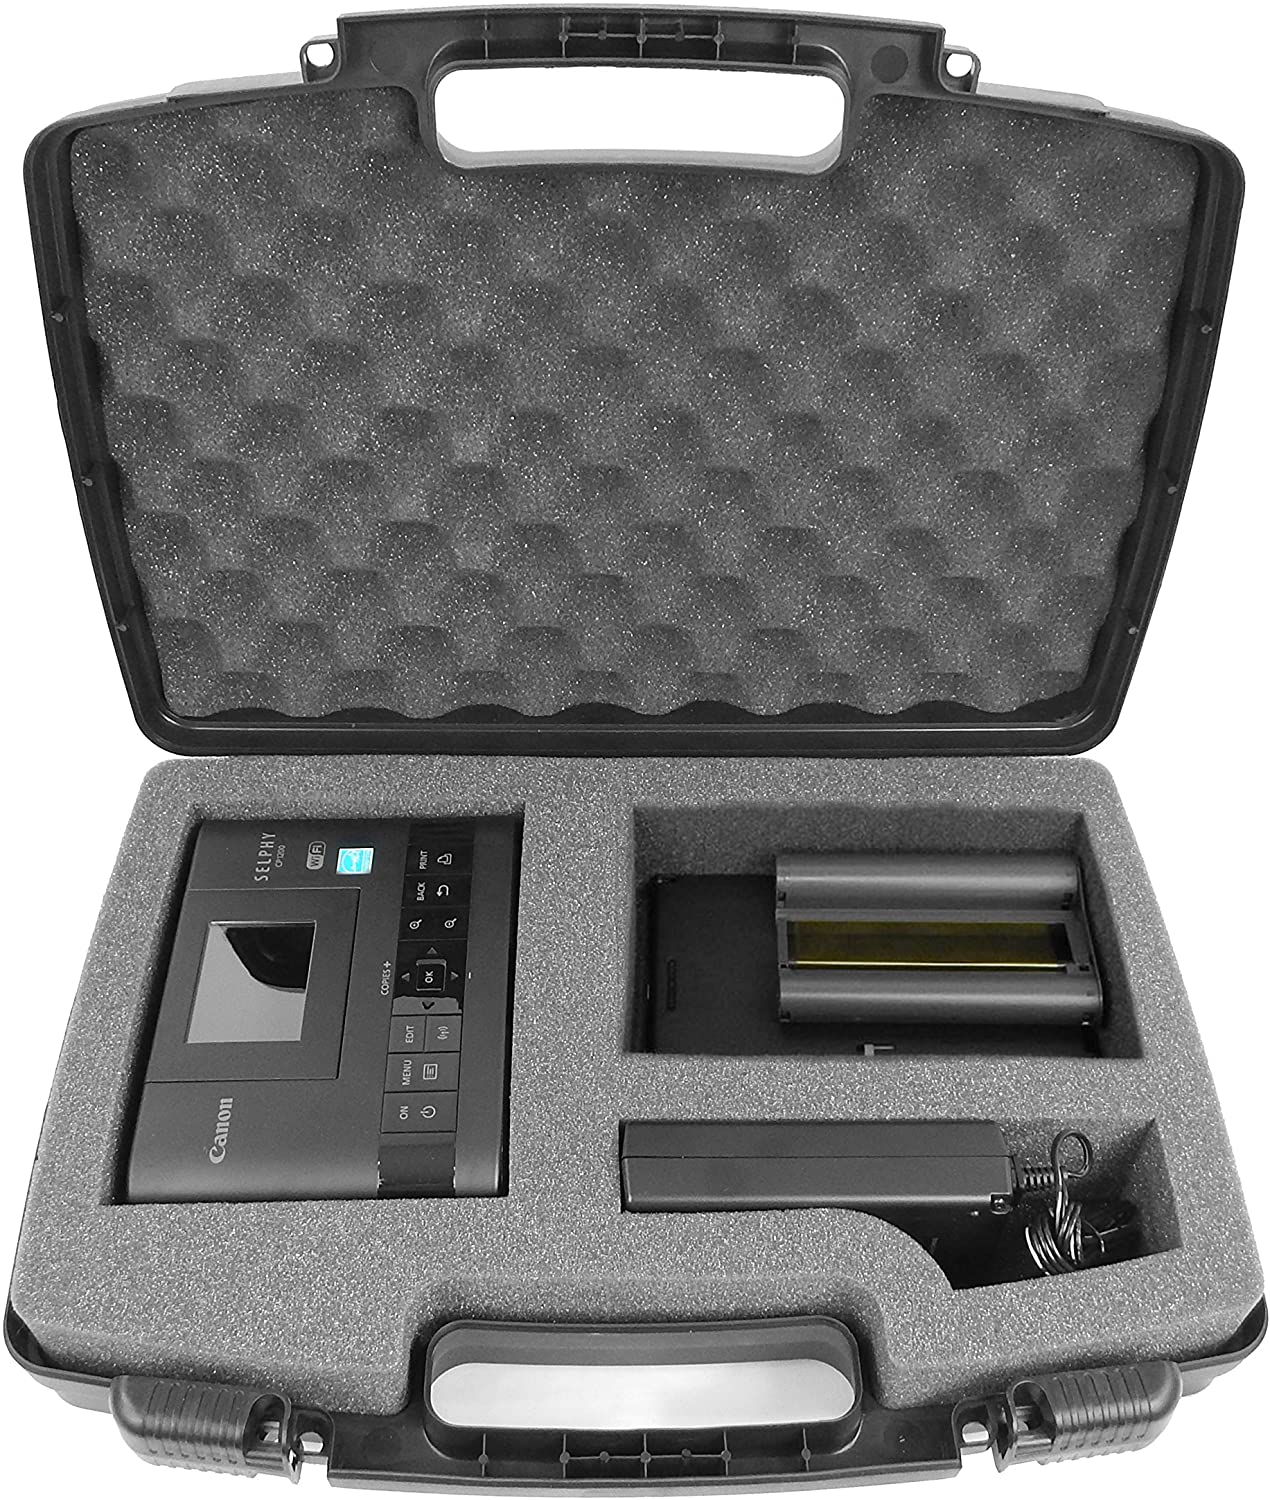 Alkoo Hard Case for Canon CP1500 for Canon Selphy CP1300 Wireless